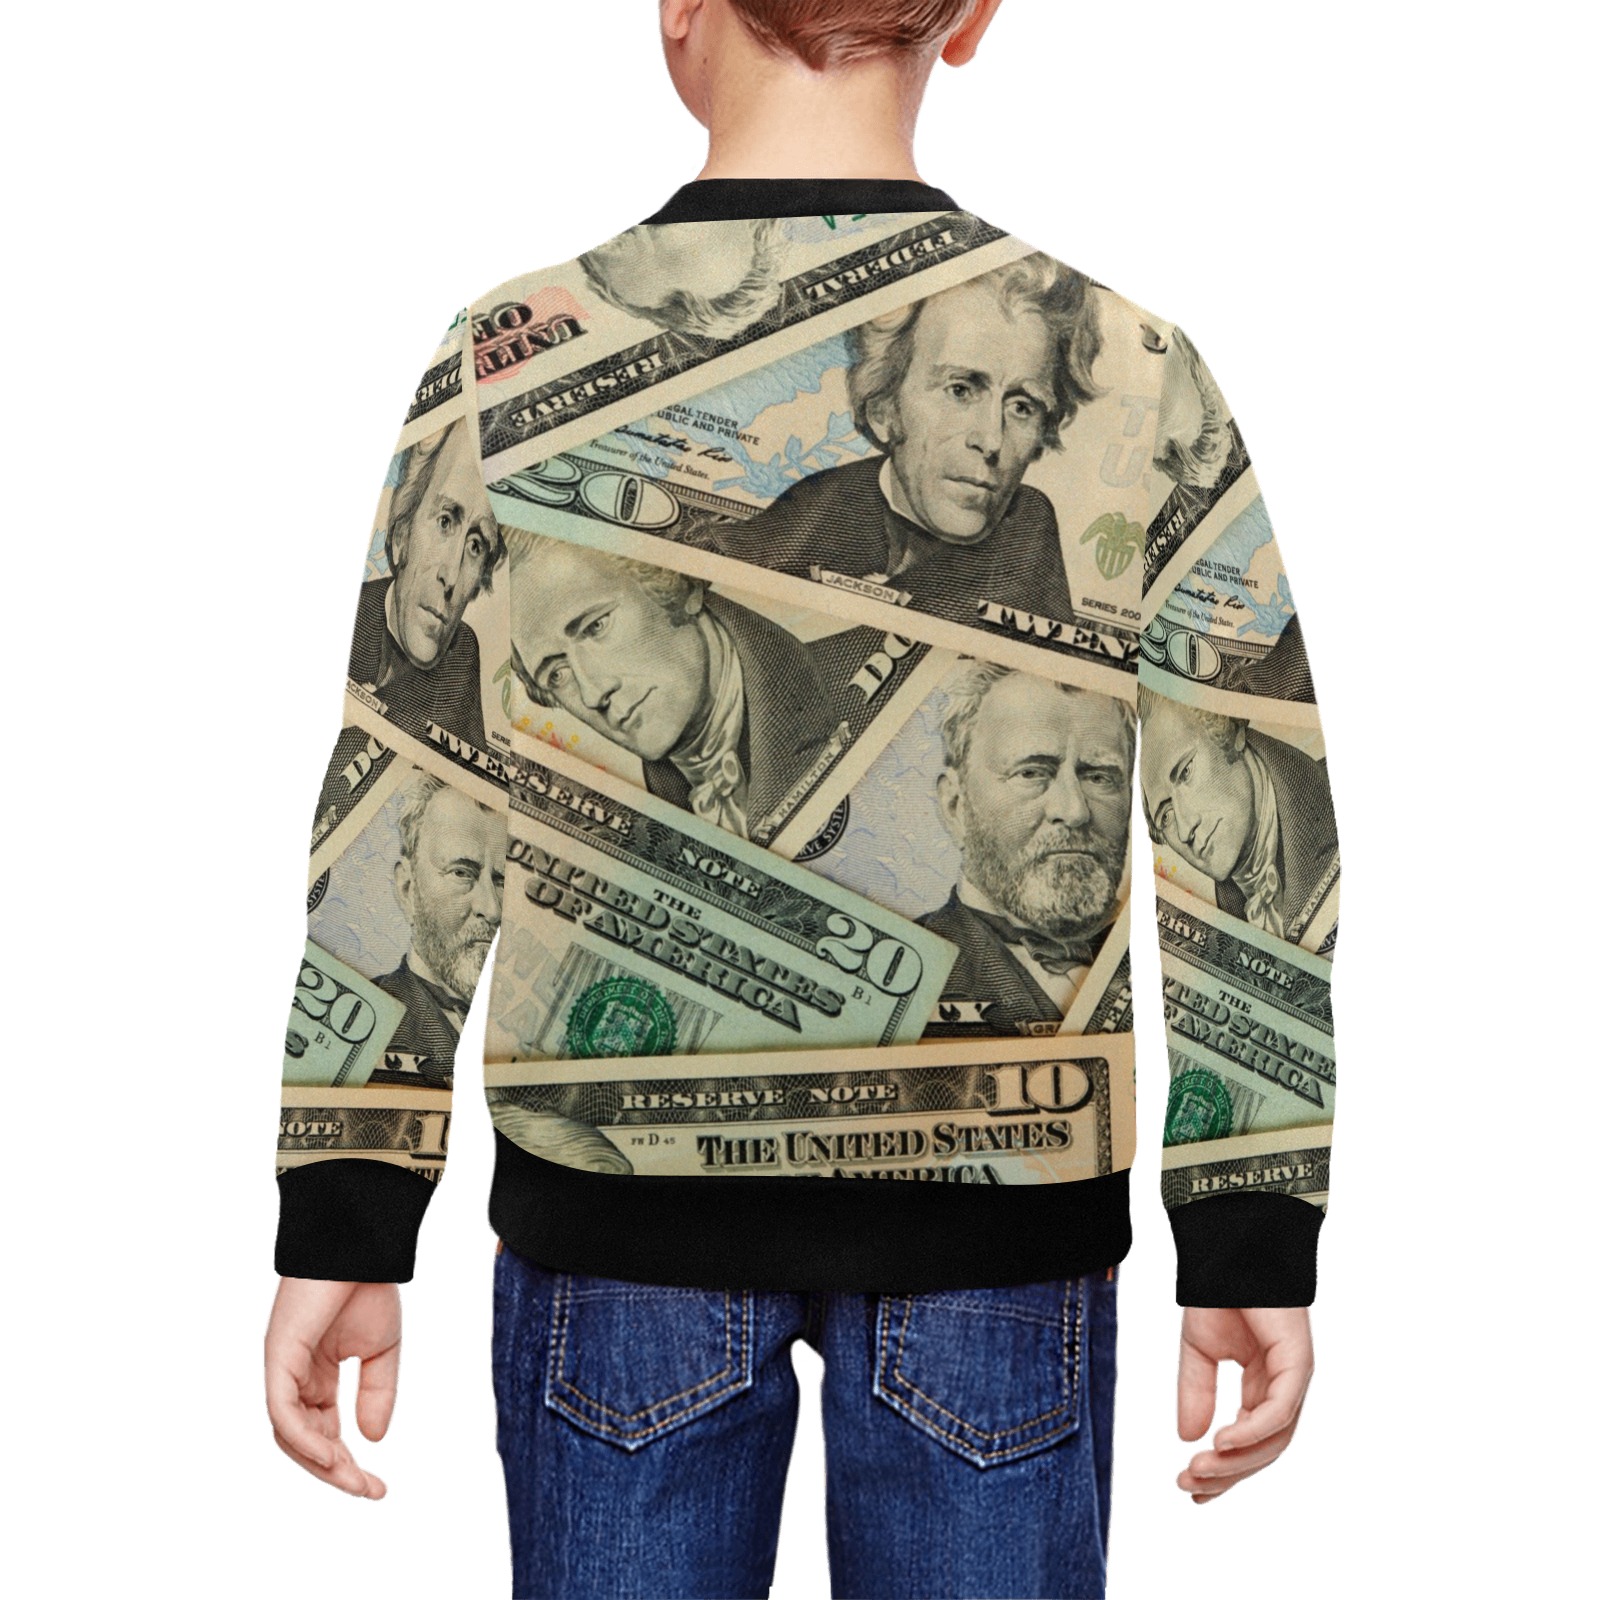 US PAPER CURRENCY All Over Print Crewneck Sweatshirt for Kids (Model H29)